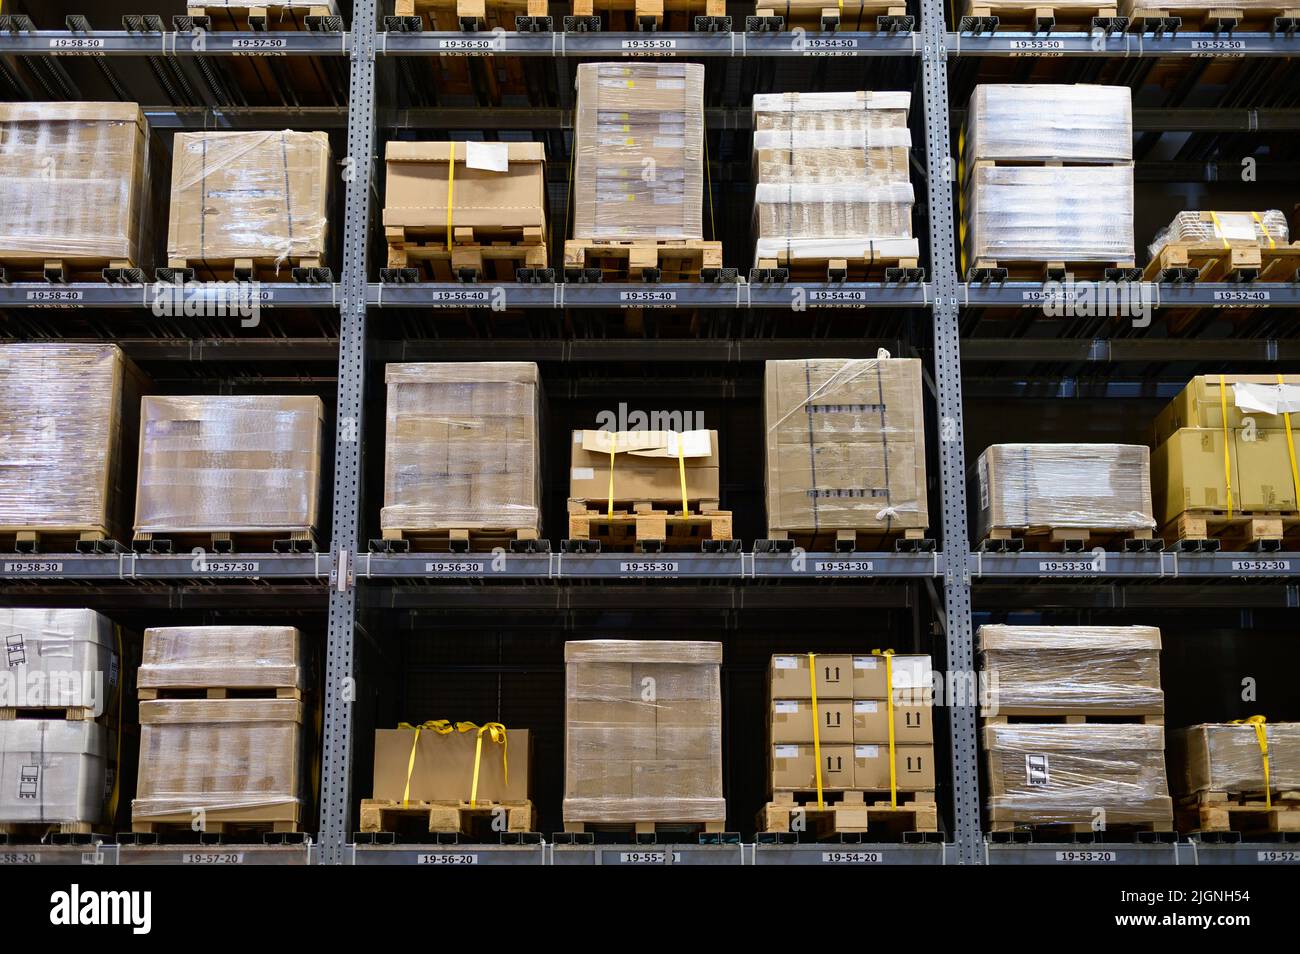 Shelving system with goods in warehouse Stock Photo